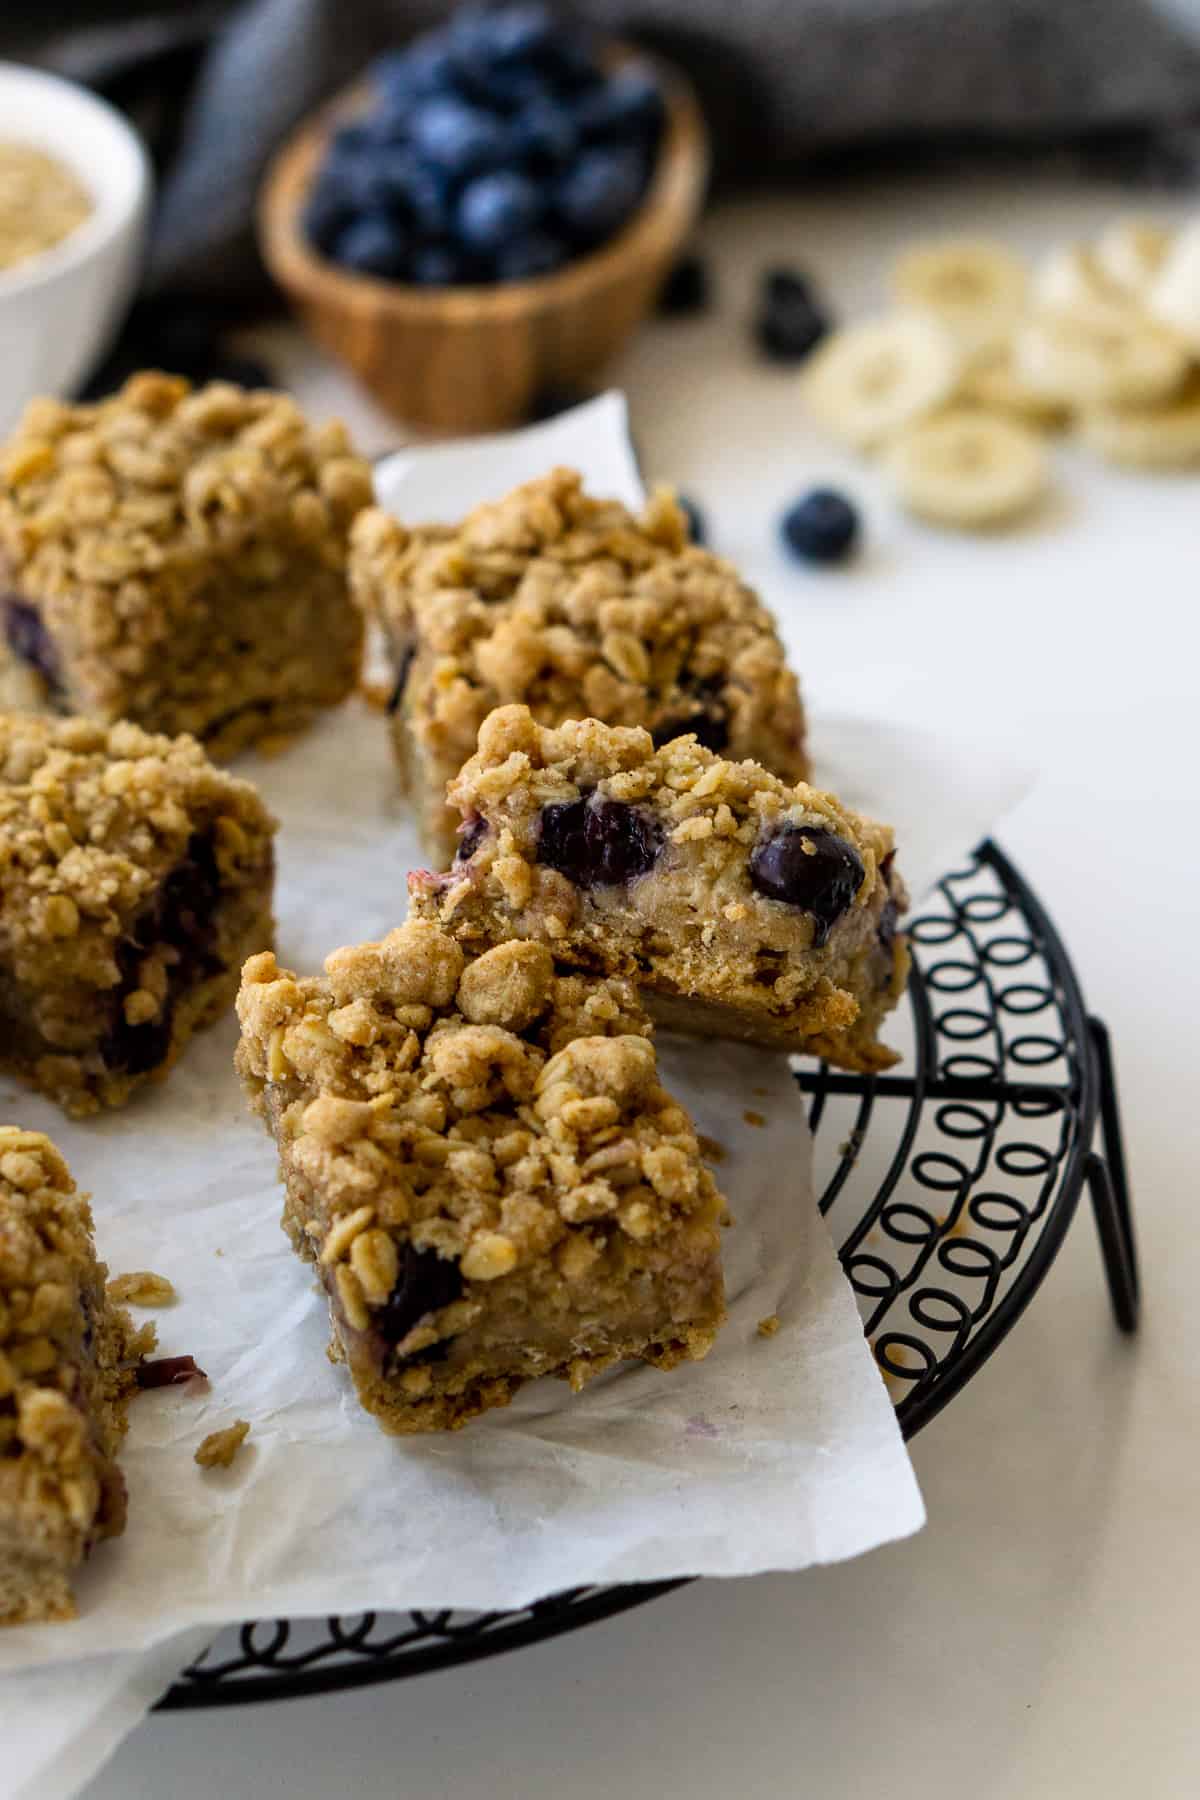 Baked banana blueberry oat bars cut into squares on a cooling rack